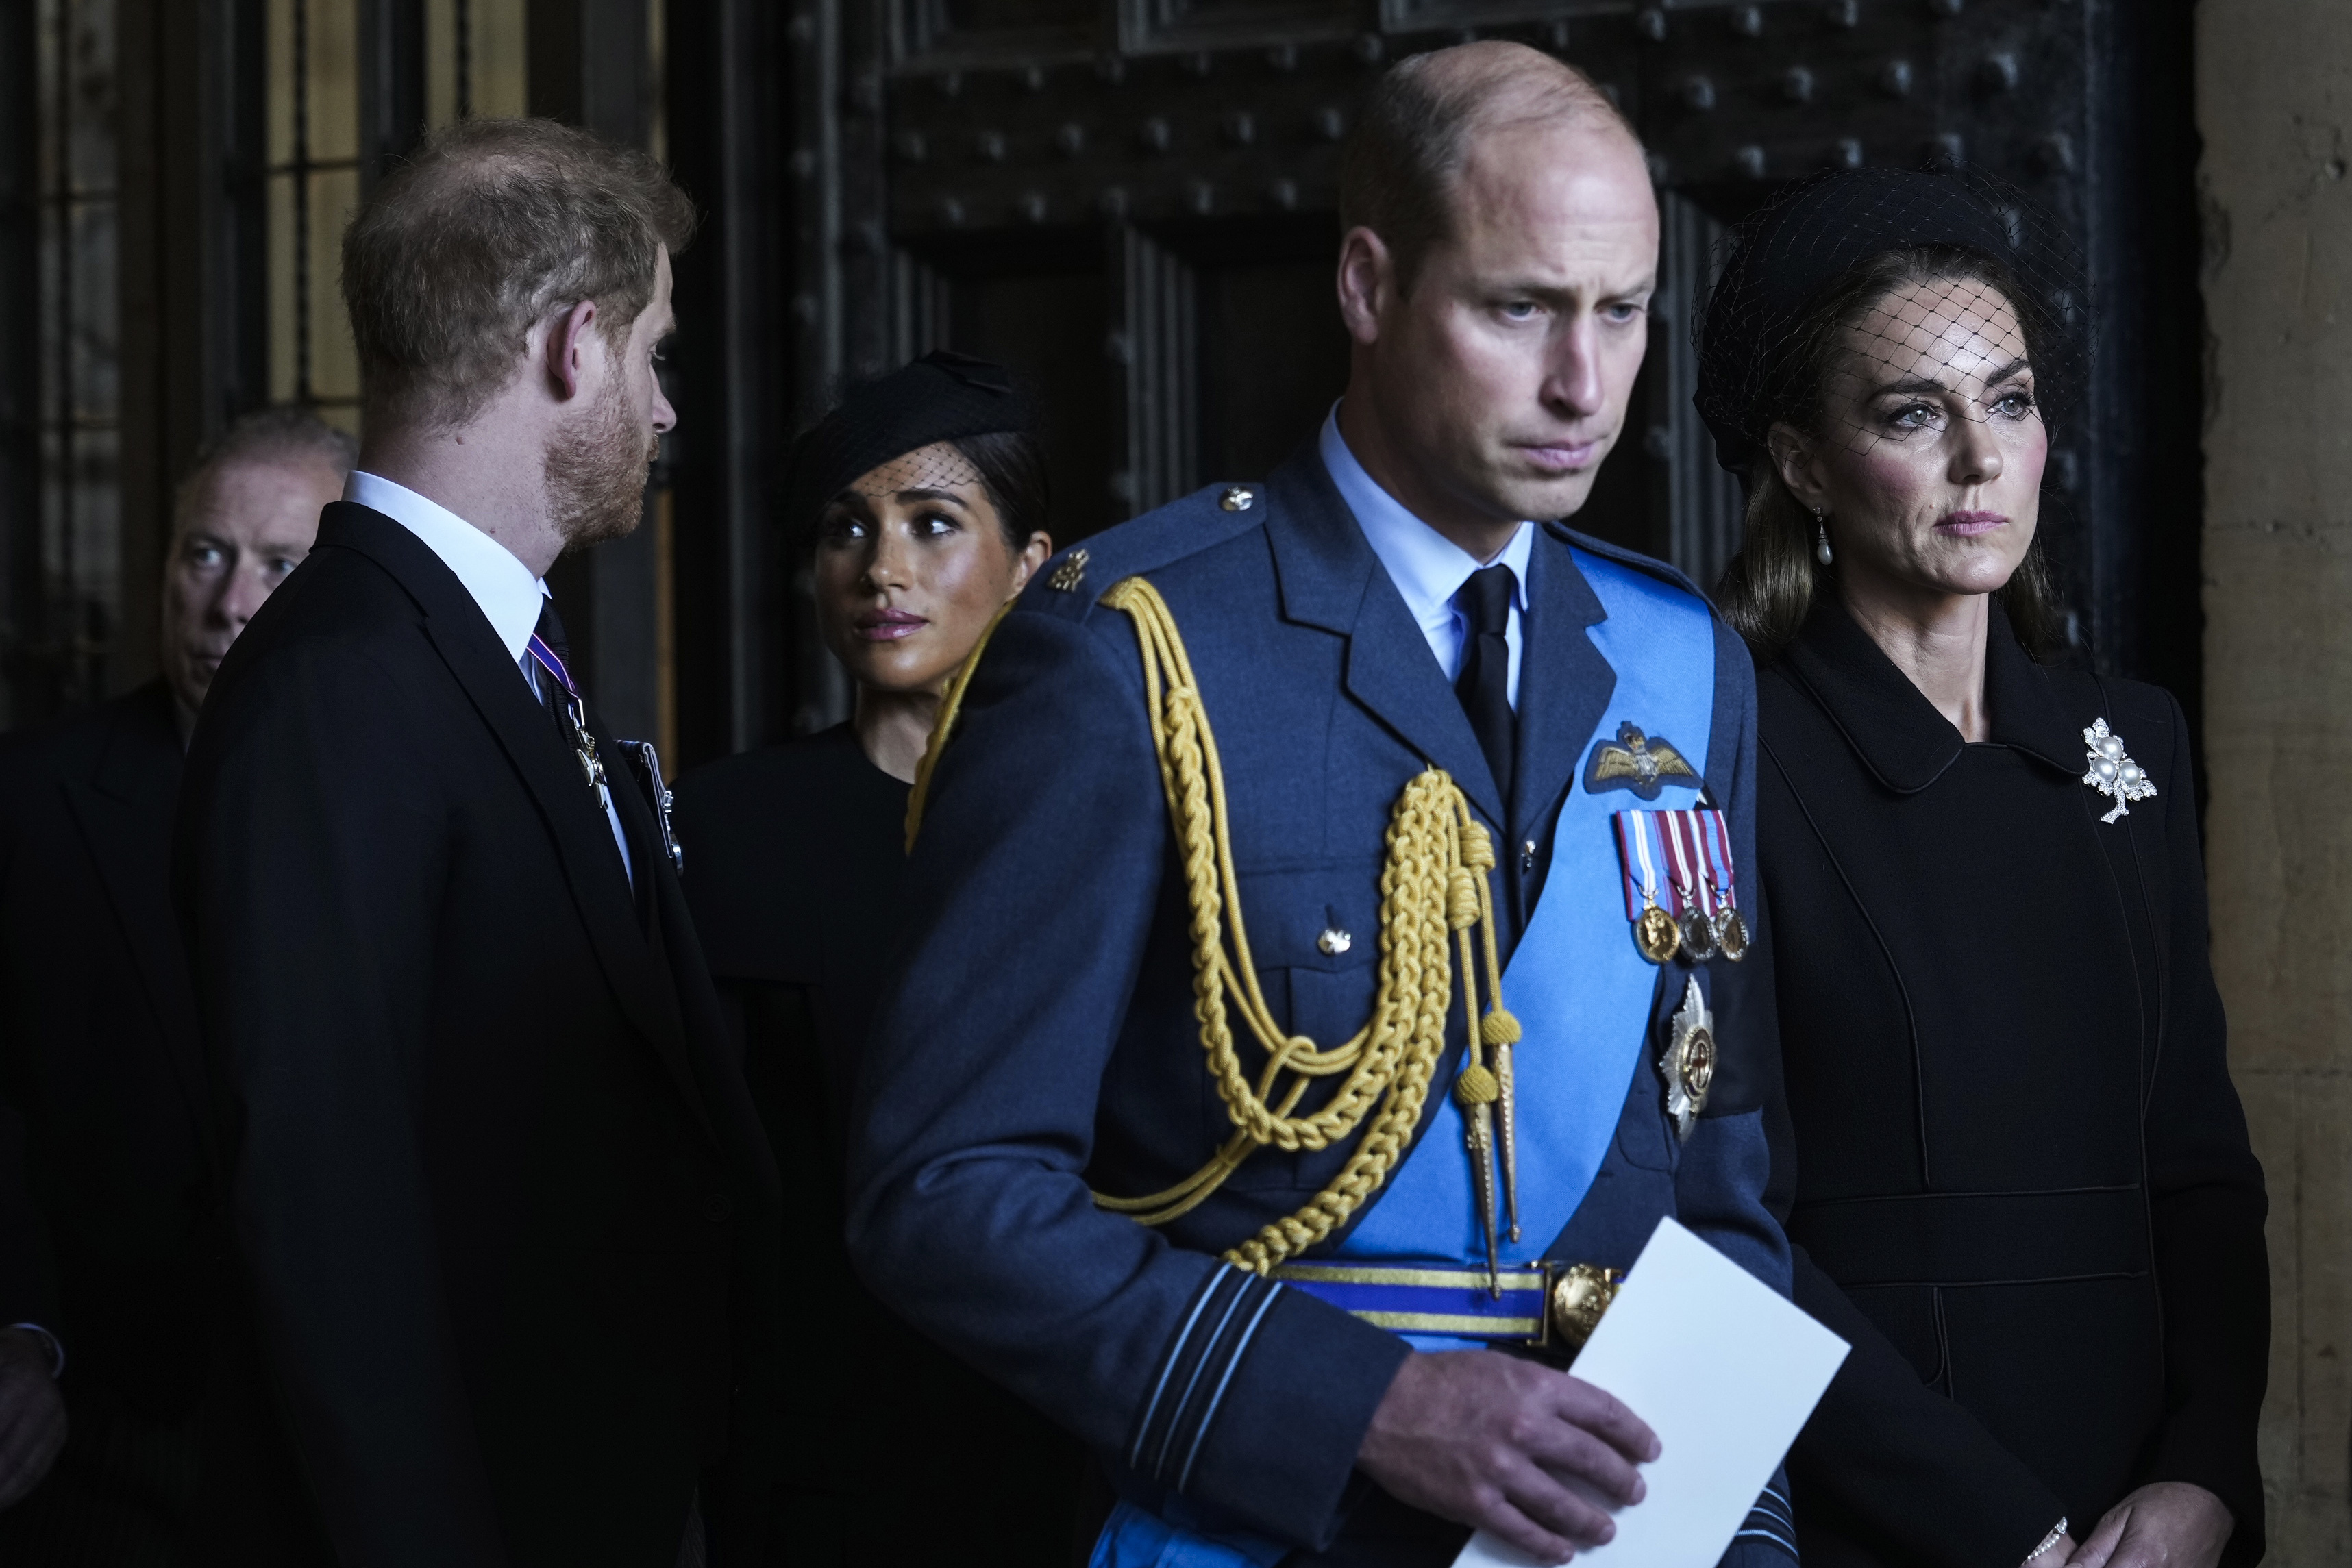 Prince William, Catherine, Prince Harry, and Meghan leave after escorting the coffin of Queen Elizabeth II to Westminster Hall from Buckingham Palace for her lying in state, on September 14, 2022 in London, England | Source: Getty Images